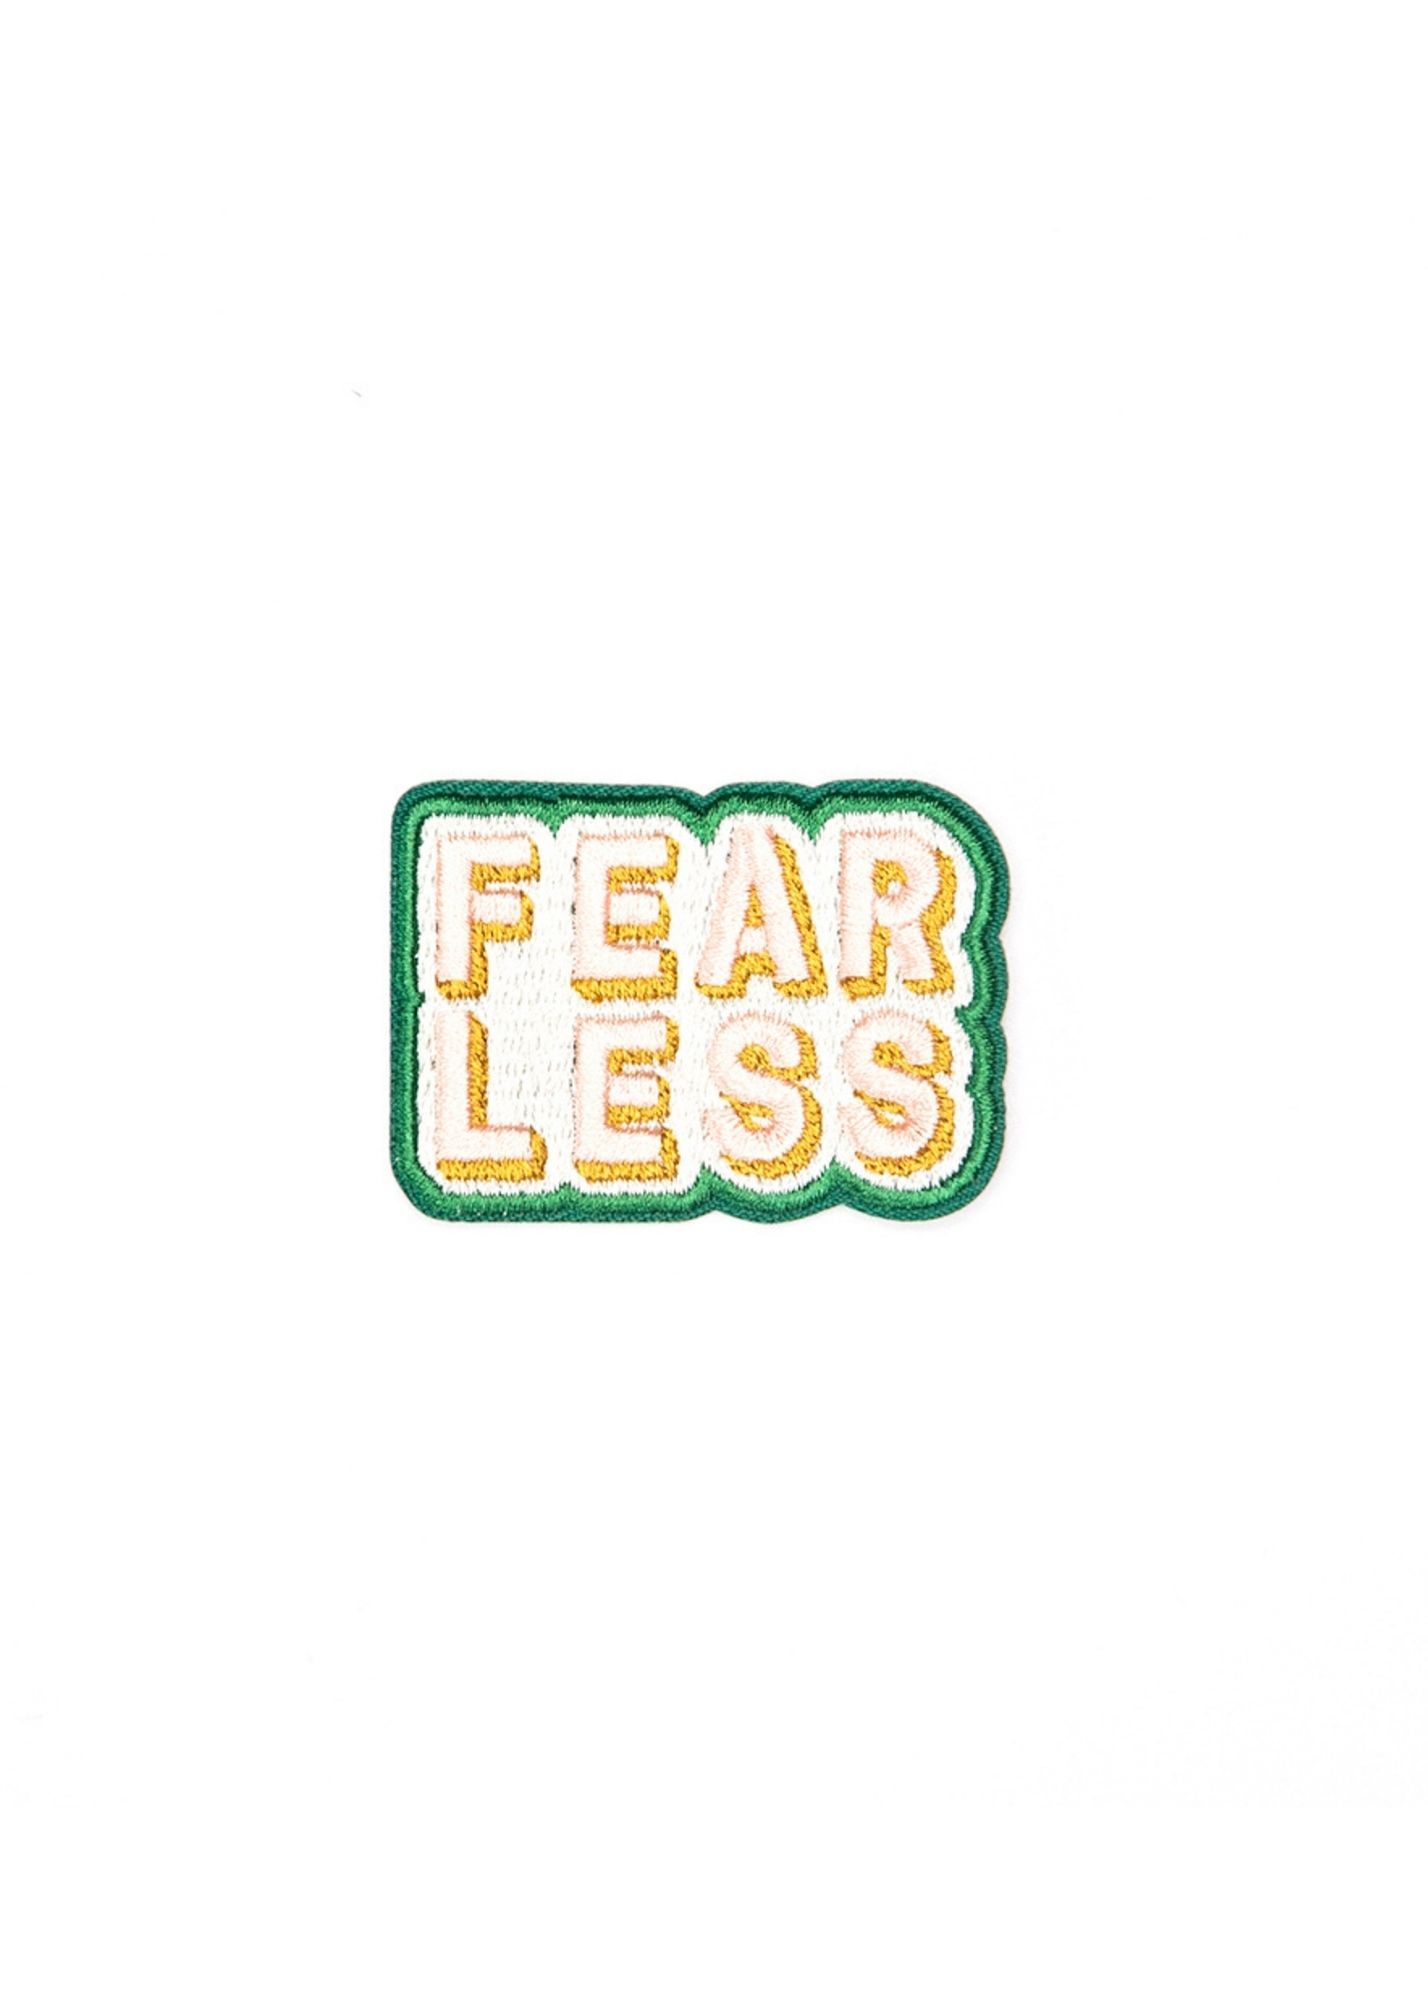 Encouraging Iron-on Patch Home & Lifestyle Inherit Co. Fearless